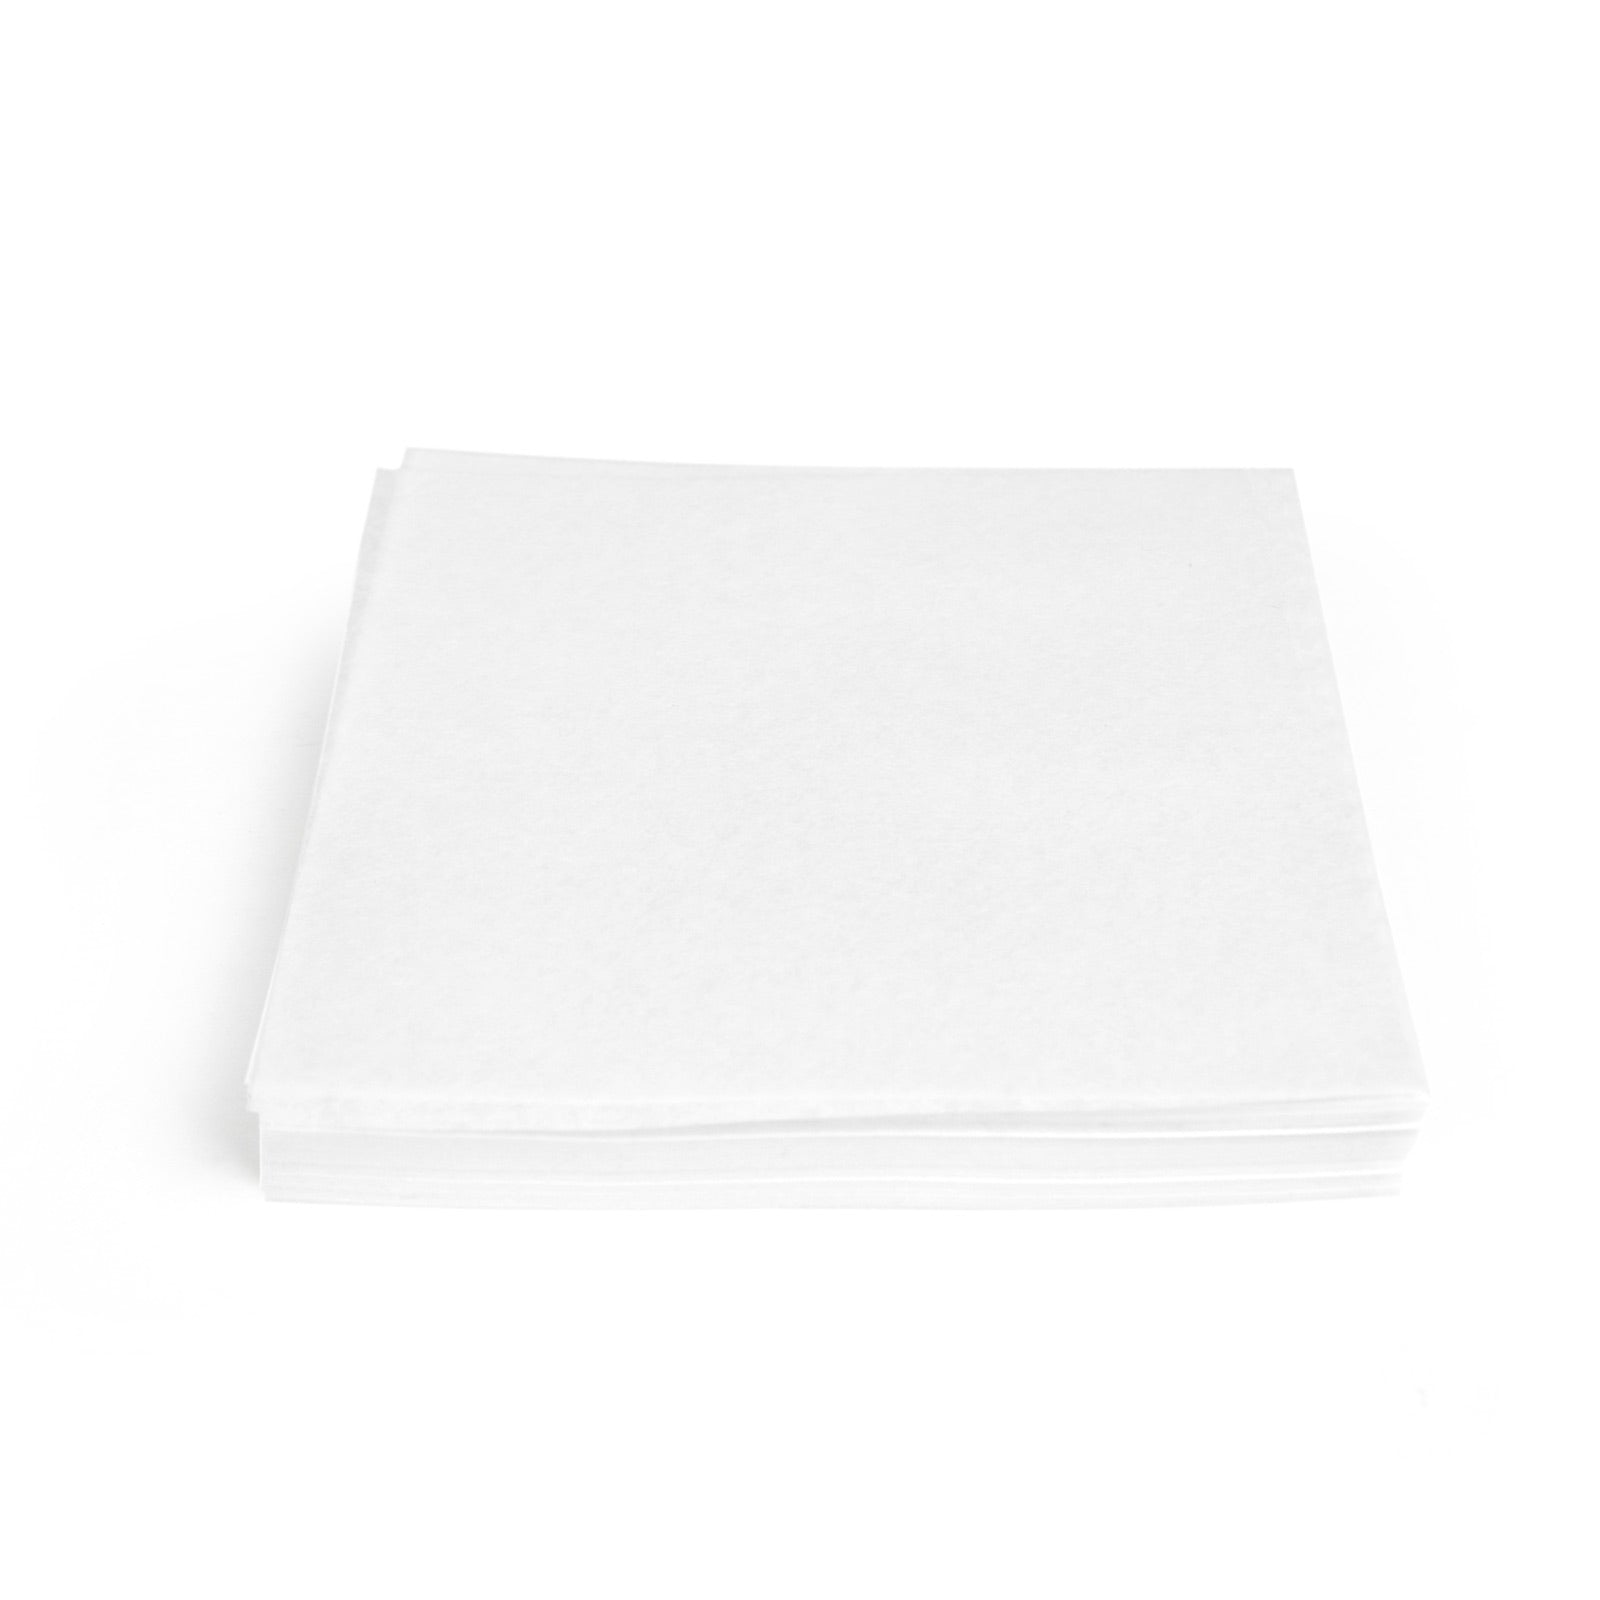 4" x 4" Parchment Paper Sheets - Silicone Coated - 1,000 Count